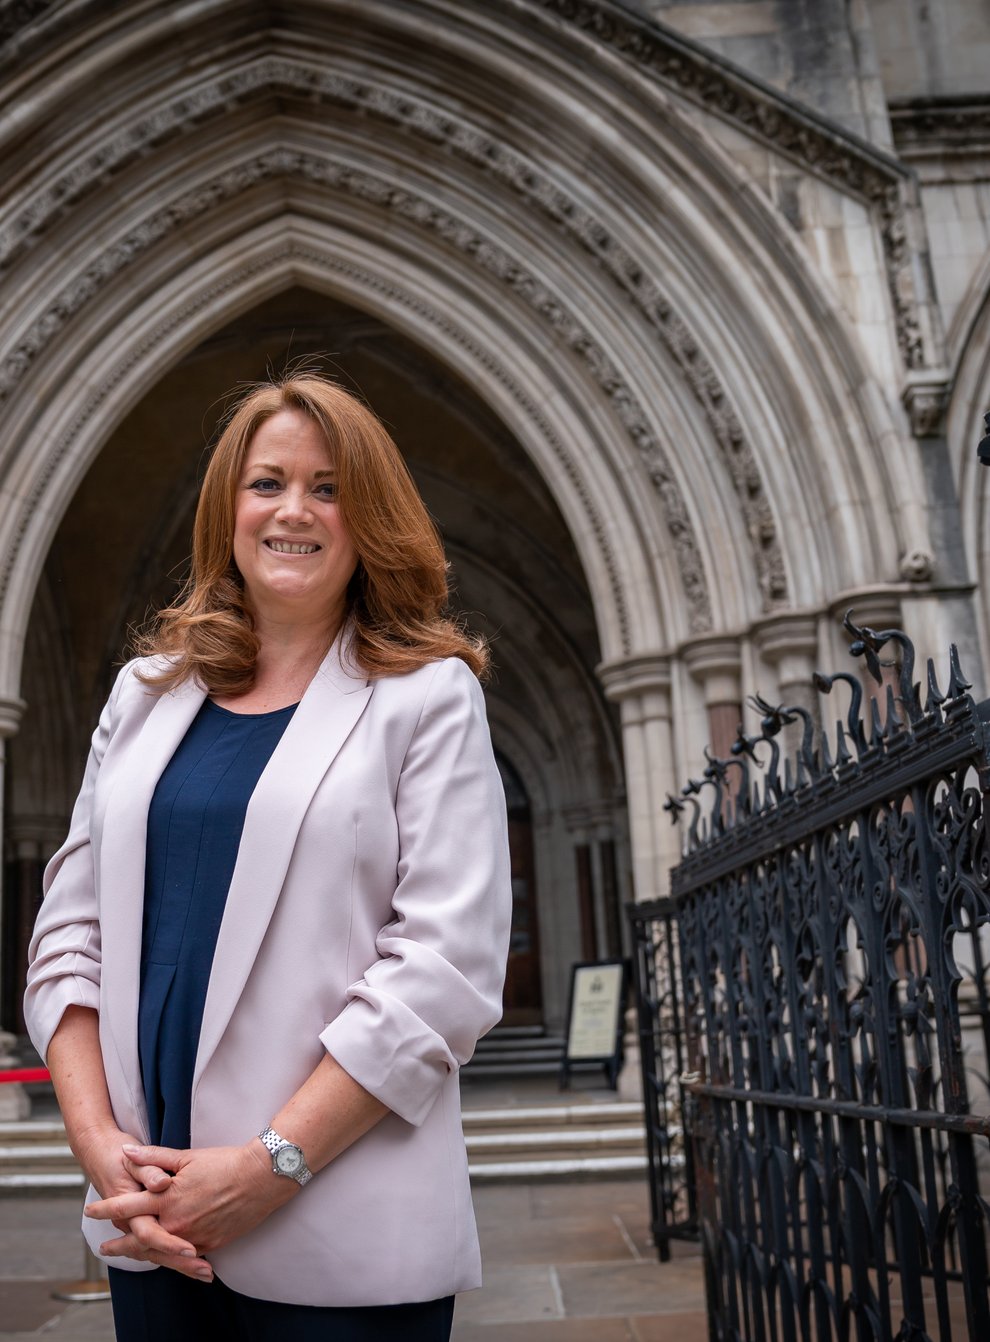 The Conservative MP for Burton, Kate Griffiths outside the Royal Courts of Justice in London. The 51-year-old has spoken of her relationship with her politician ex-husband (PA)